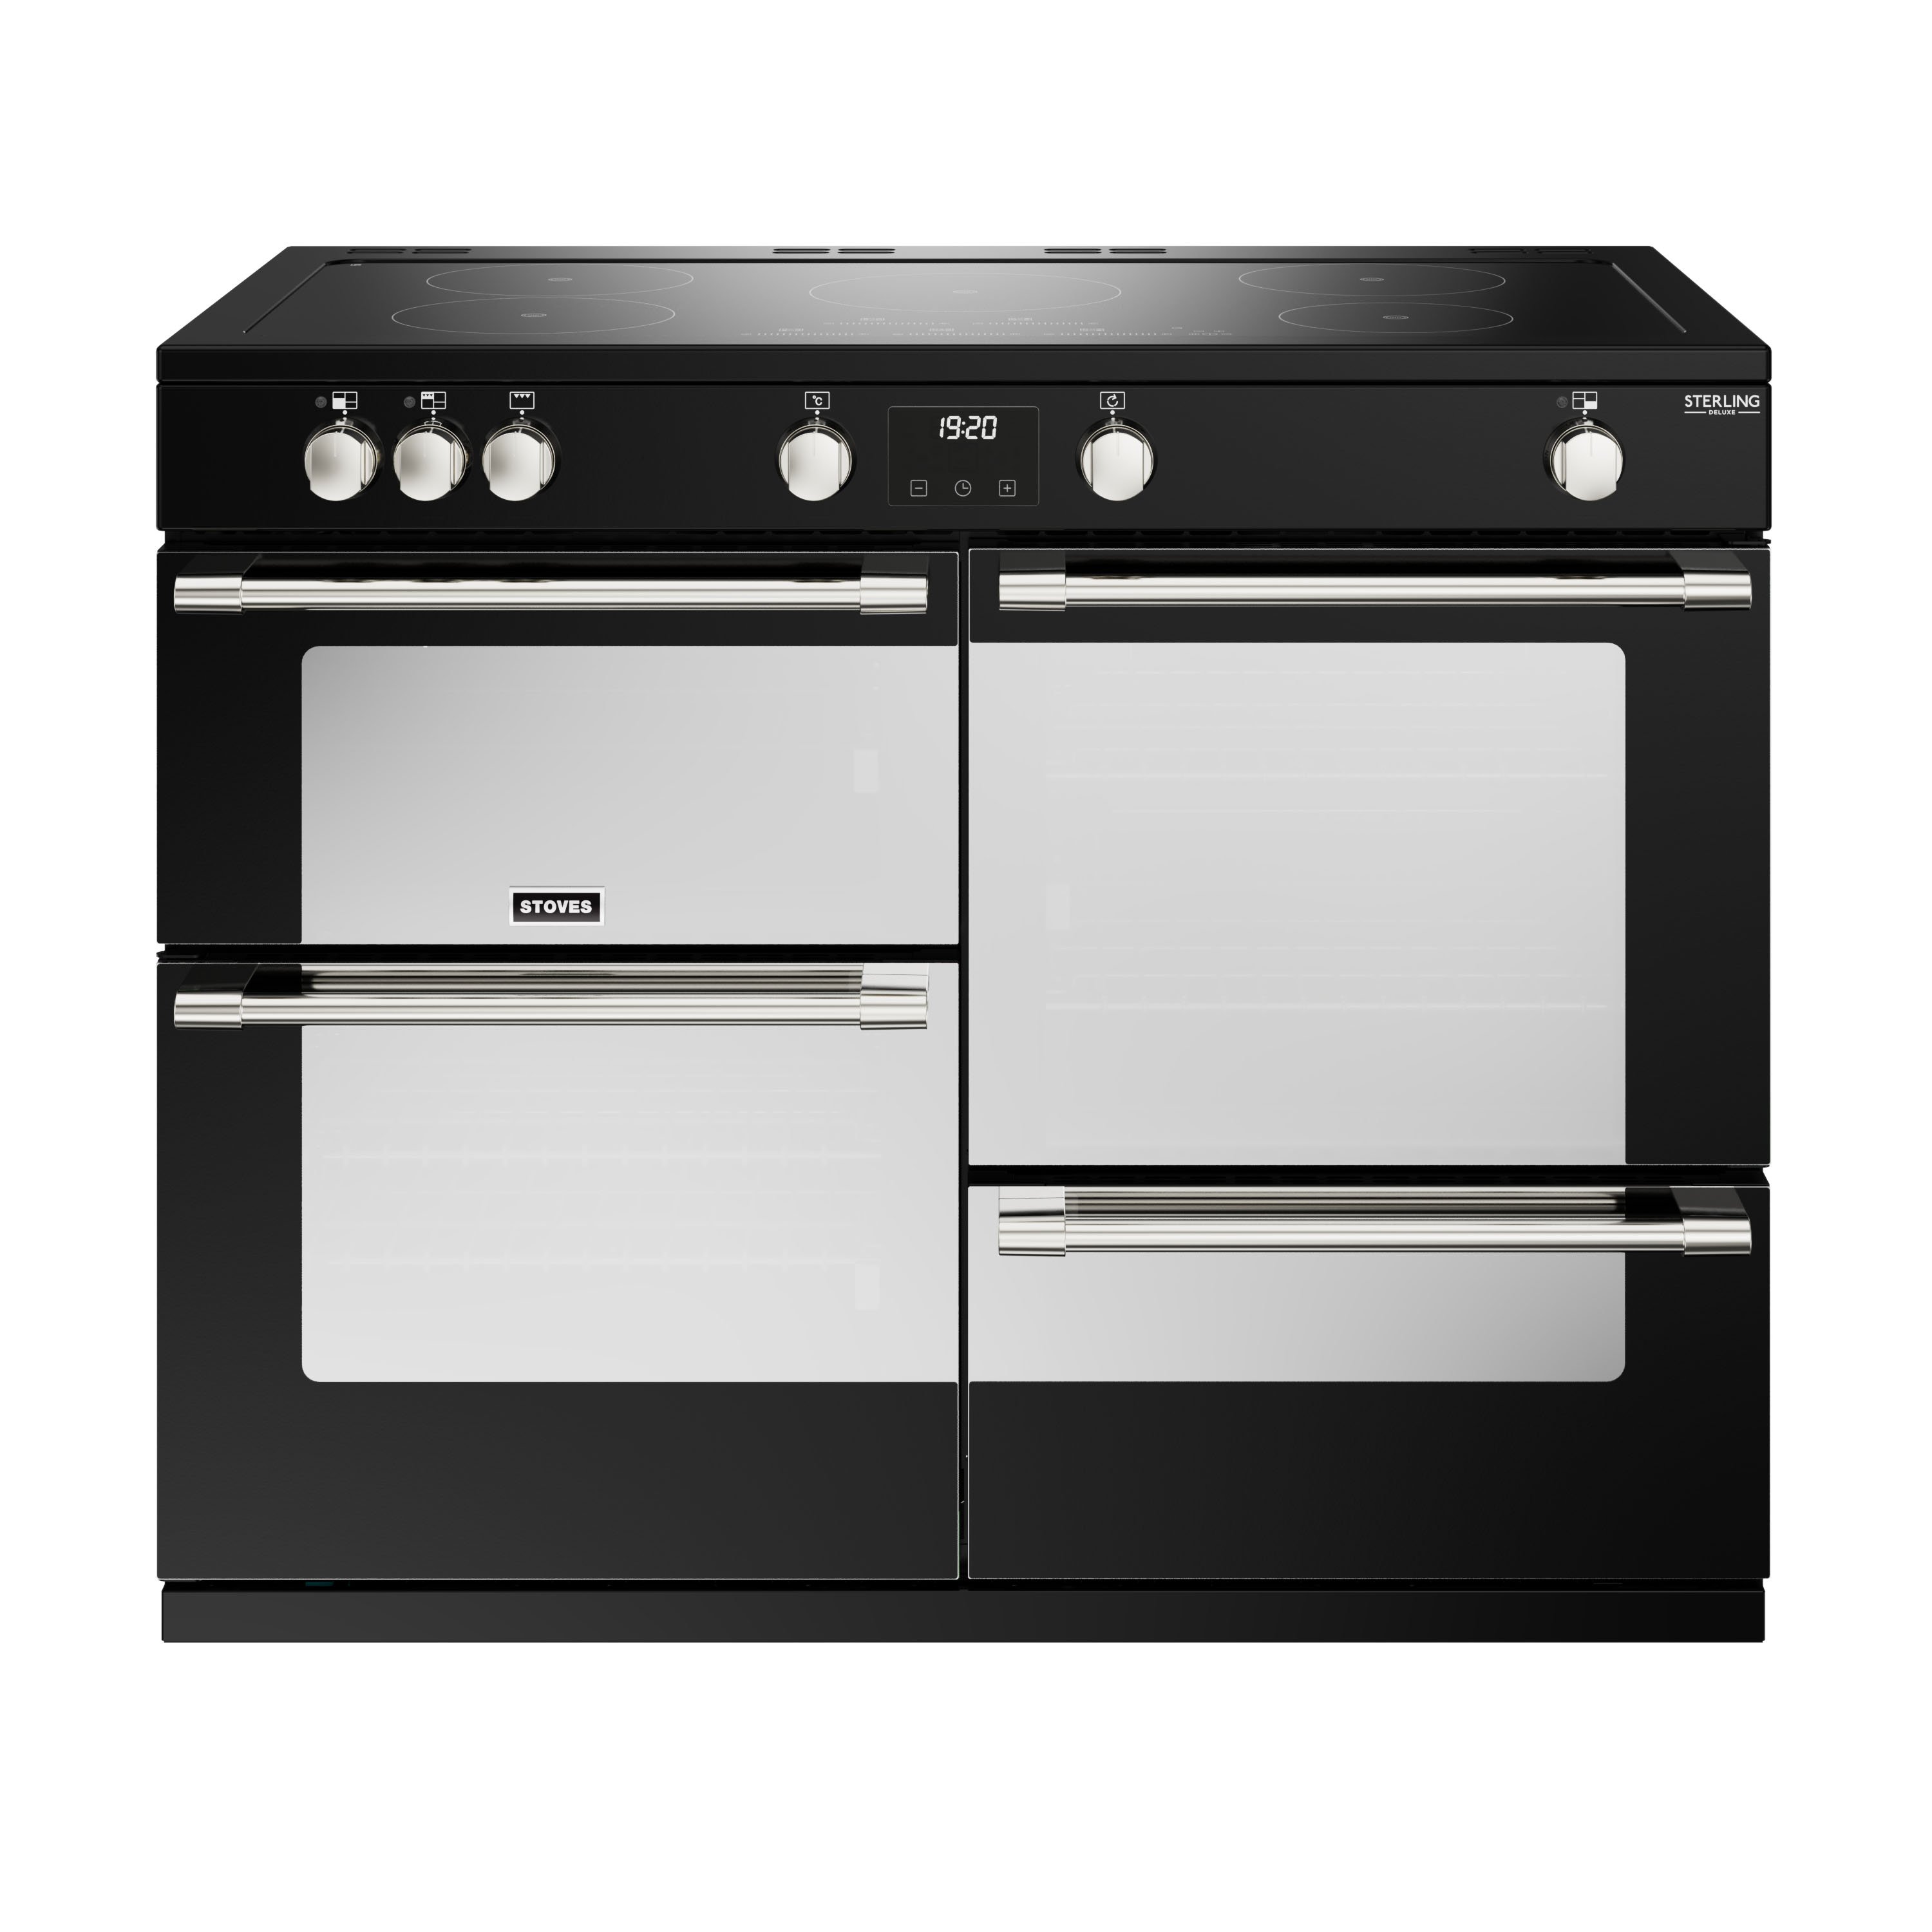 110cm electric induction range cooker with a 5 zone touch control hob, conventional oven & grill, multifunction main oven with TrueTemp digital thermostat, fanned second oven and dedicated slow cook oven